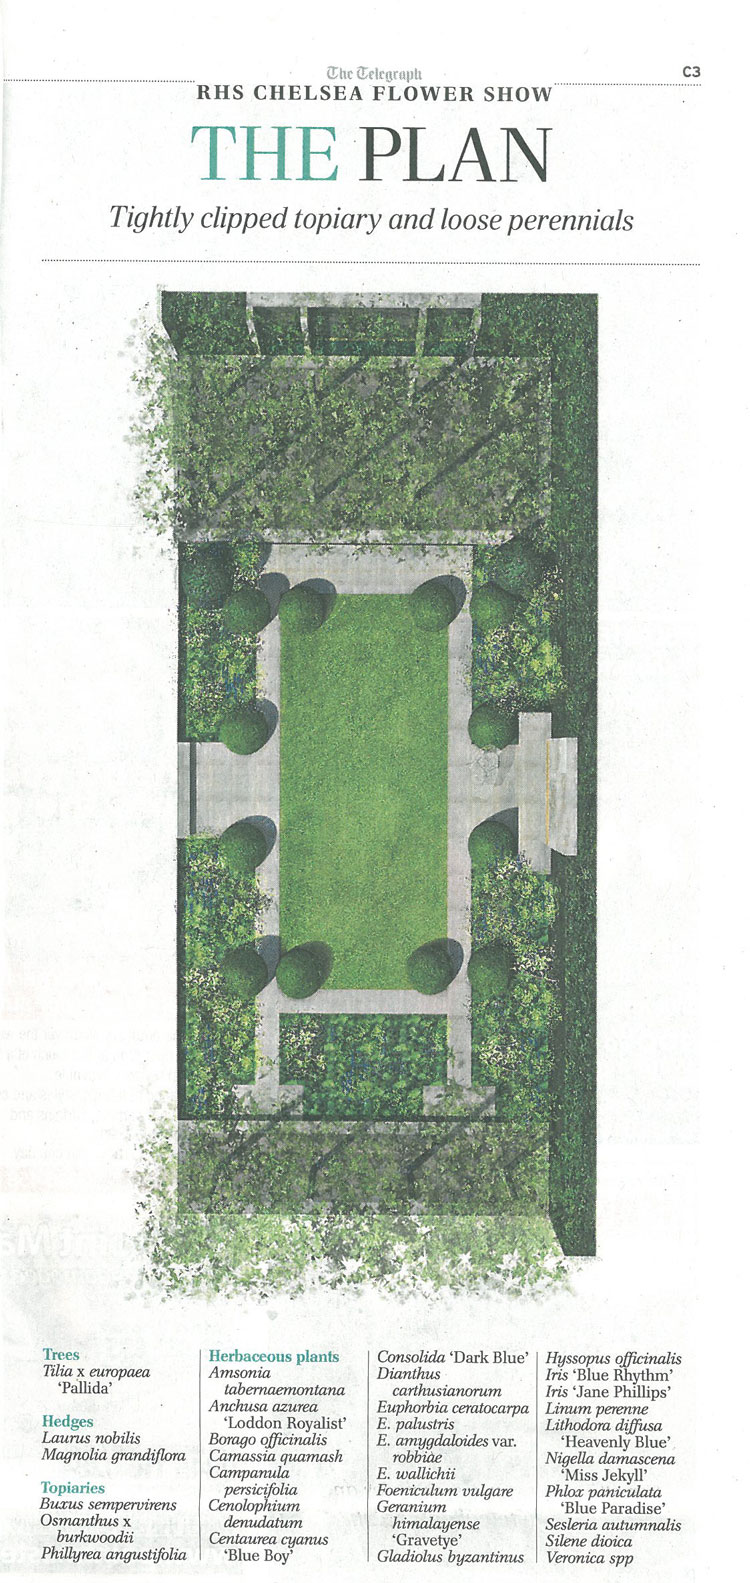 Plan of the Telegraph Garden, with Plant List. Image courtesy of The Telegraph.